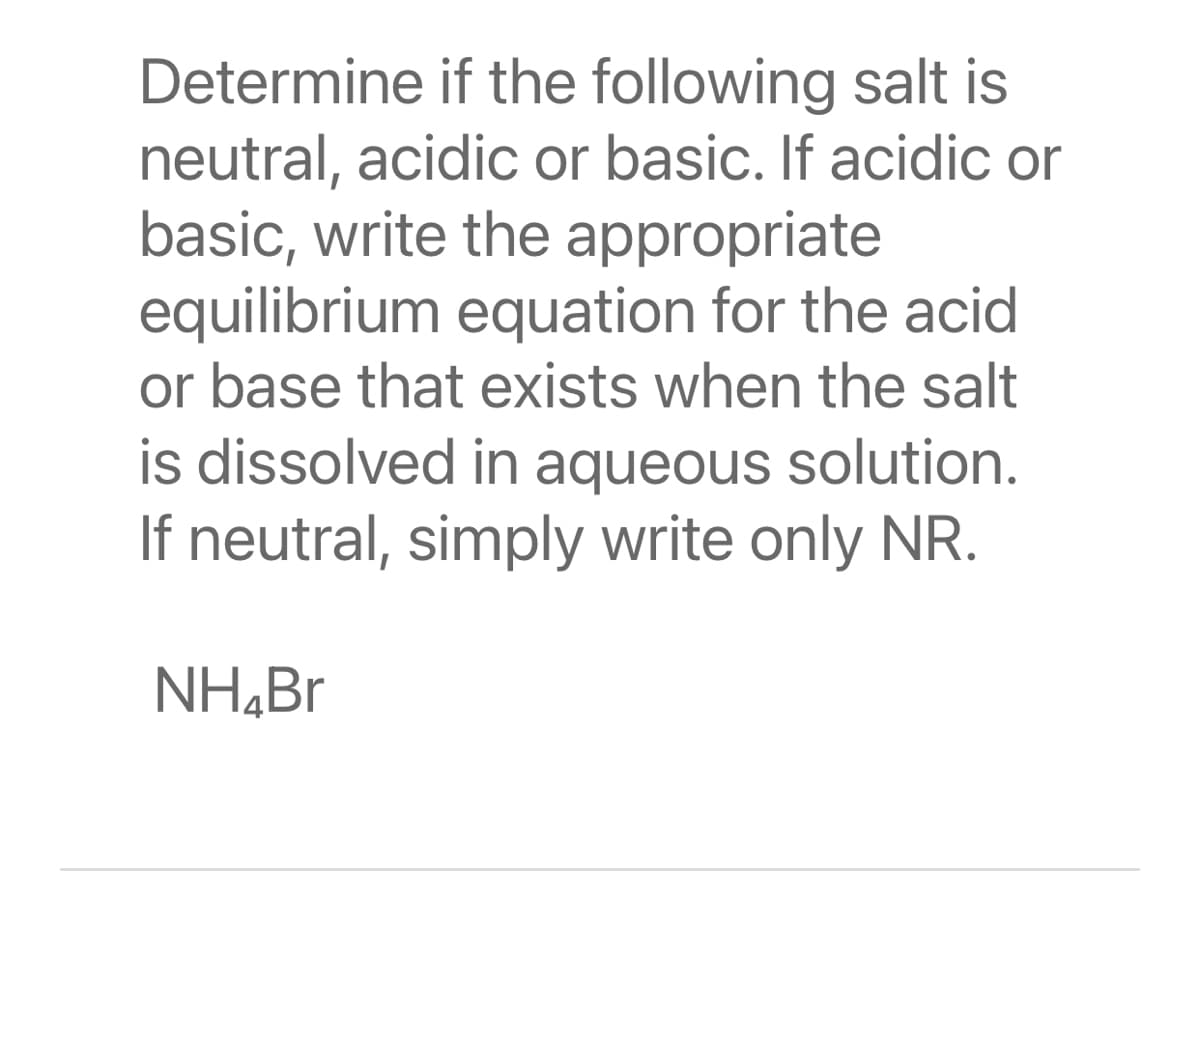 Determine if the following salt is
neutral, acidic or basic. If acidic or
basic, write the appropriate
equilibrium equation for the acid
or base that exists when the salt
is dissolved in aqueous solution.
If neutral, simply write only NR.
NH,Br
